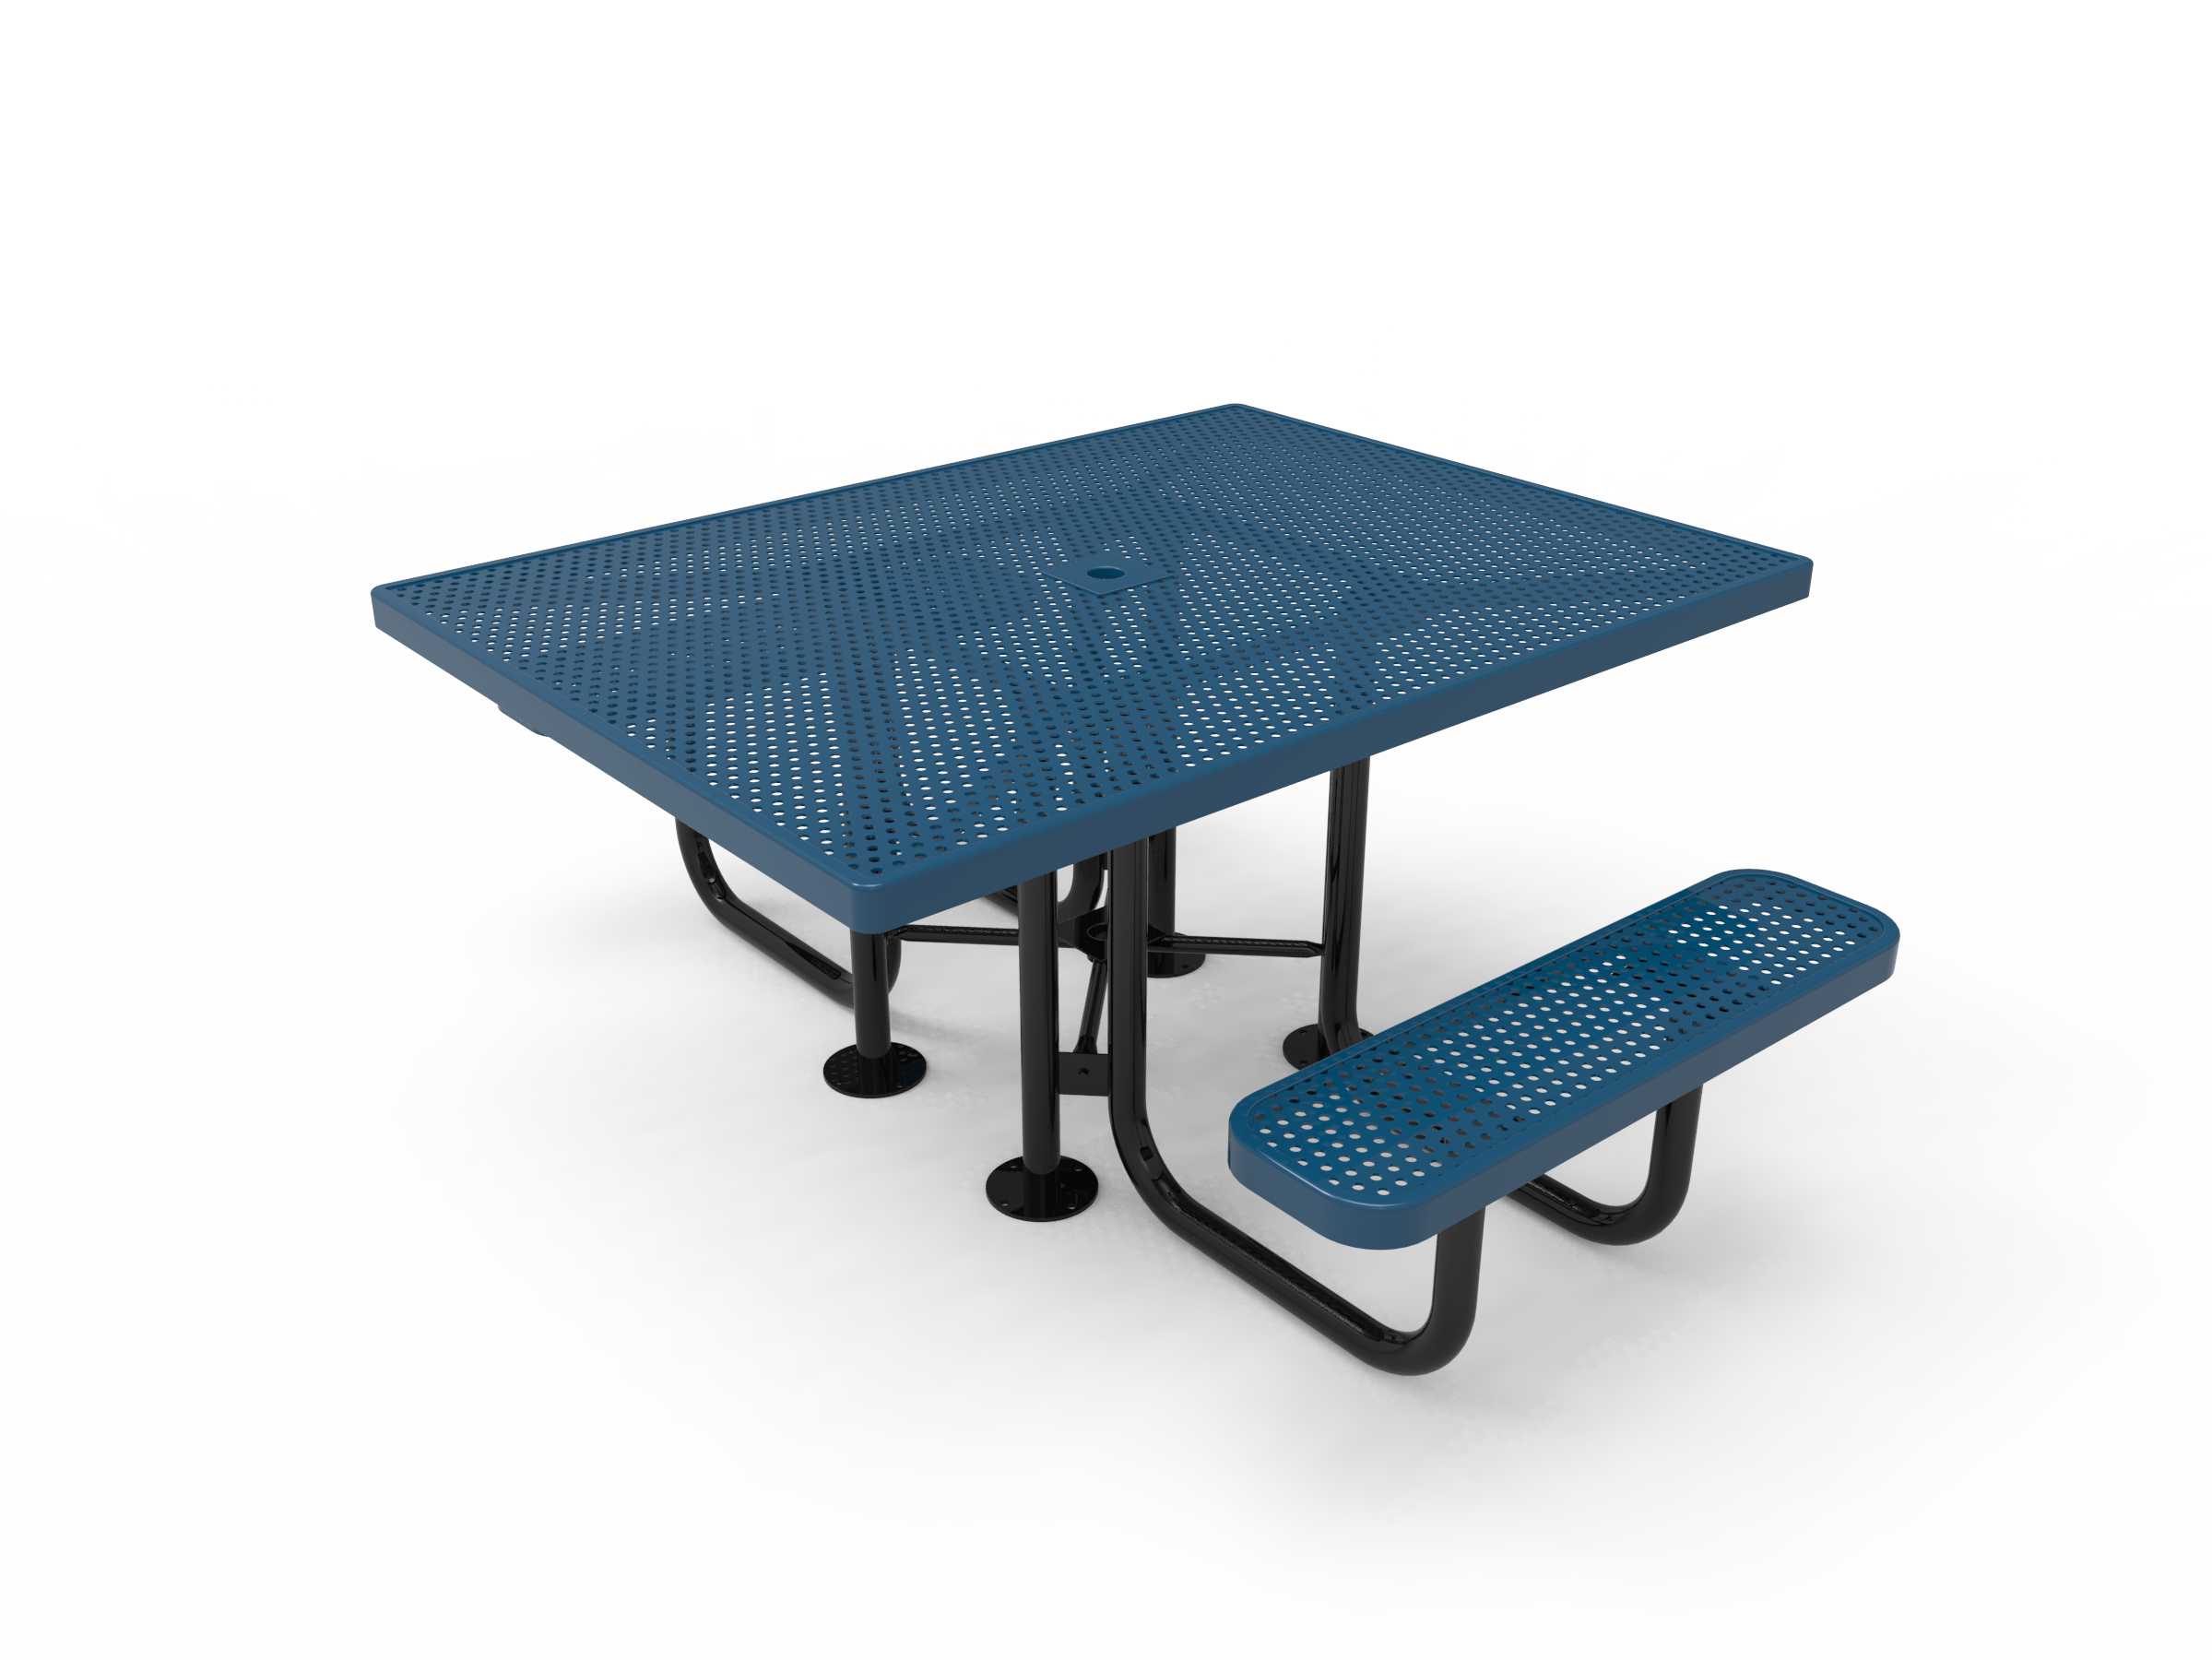 Lexington Square Portable Table - ADA Accessible, Frame with Powder Coat Finish, Top and Seats with Advanced DuraLex Coating